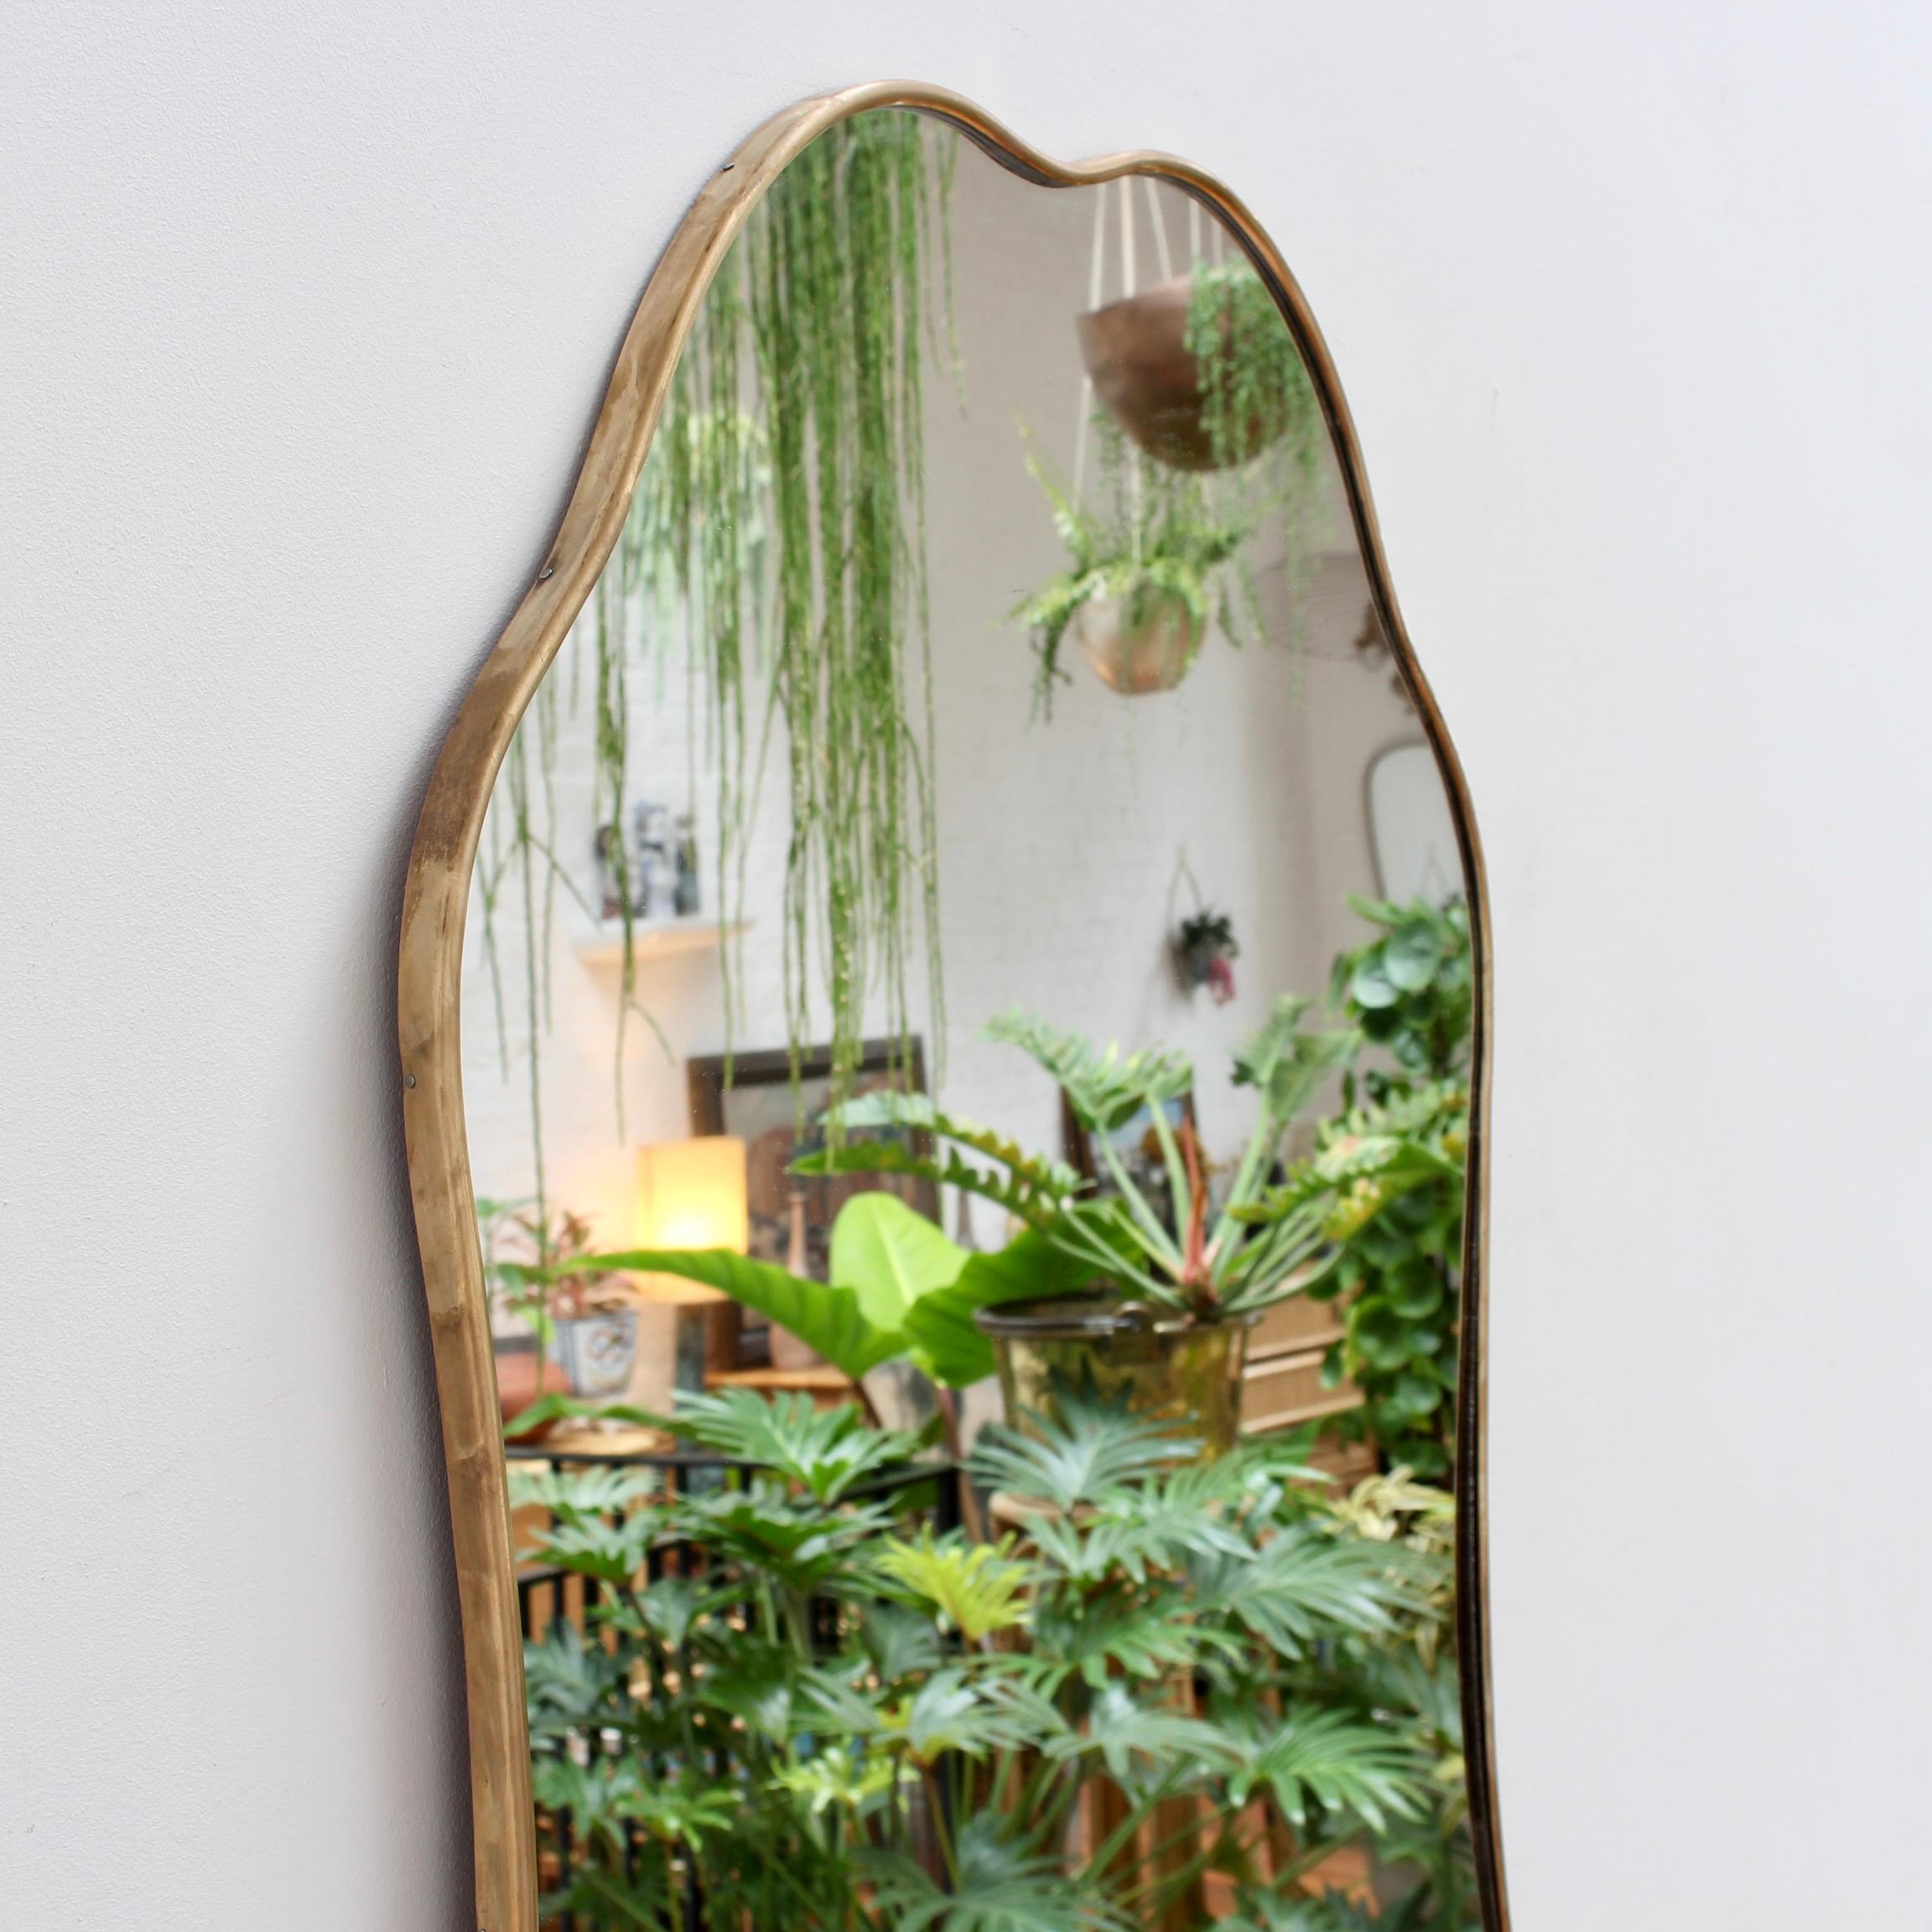 Mid-20th Century Vintage Italian Wall Mirror with Brass Frame 'circa 1950s'